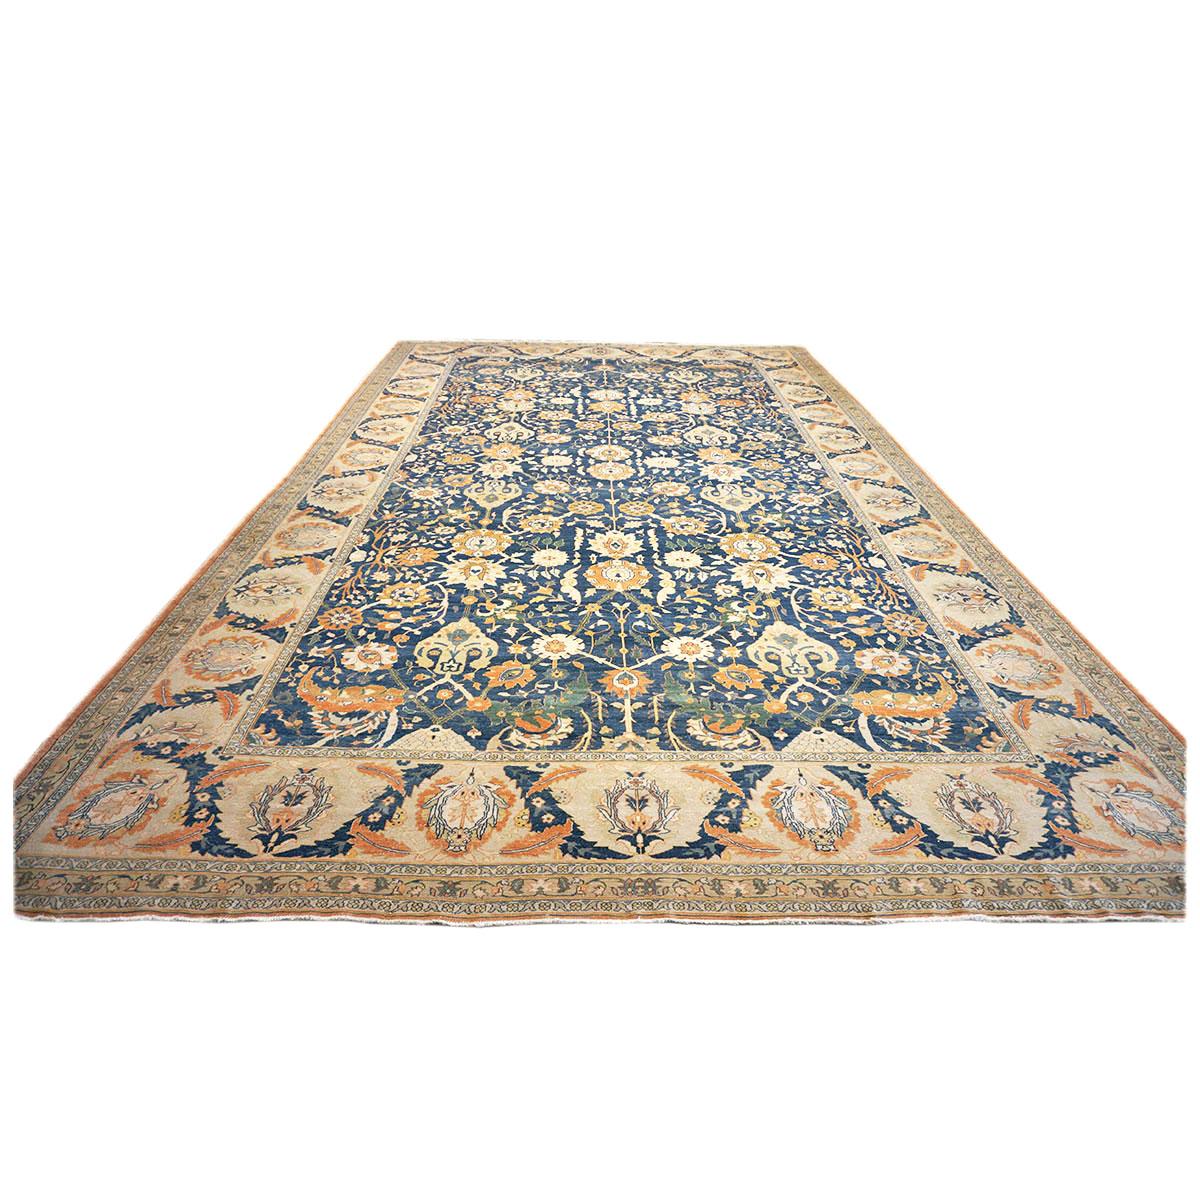 Vintage Egyptian Sultanabad 13x21 Blue, Ivory, & Orange Handmade Area Rug In Fair Condition For Sale In Houston, TX